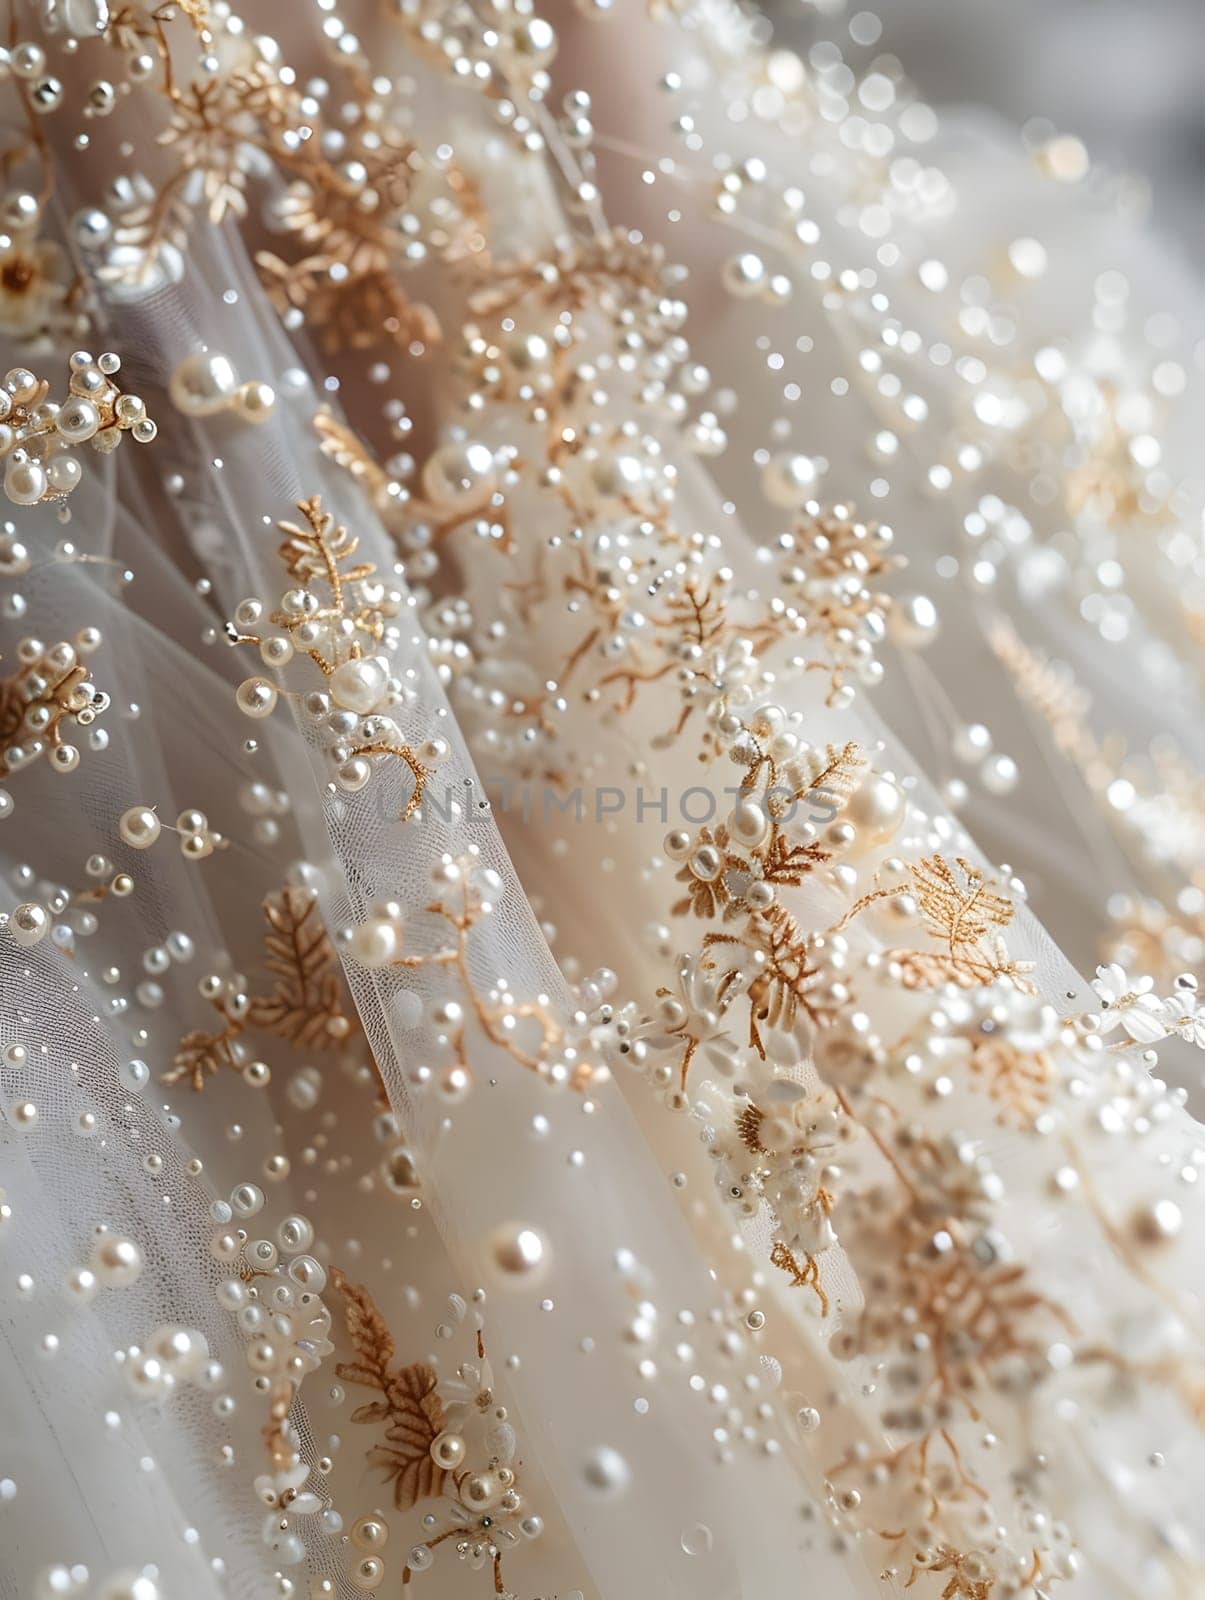 A detailed close up of a white dress adorned with pearls and gold embellishments, perfect for a bridal accessory. Captured in stunning macro photography